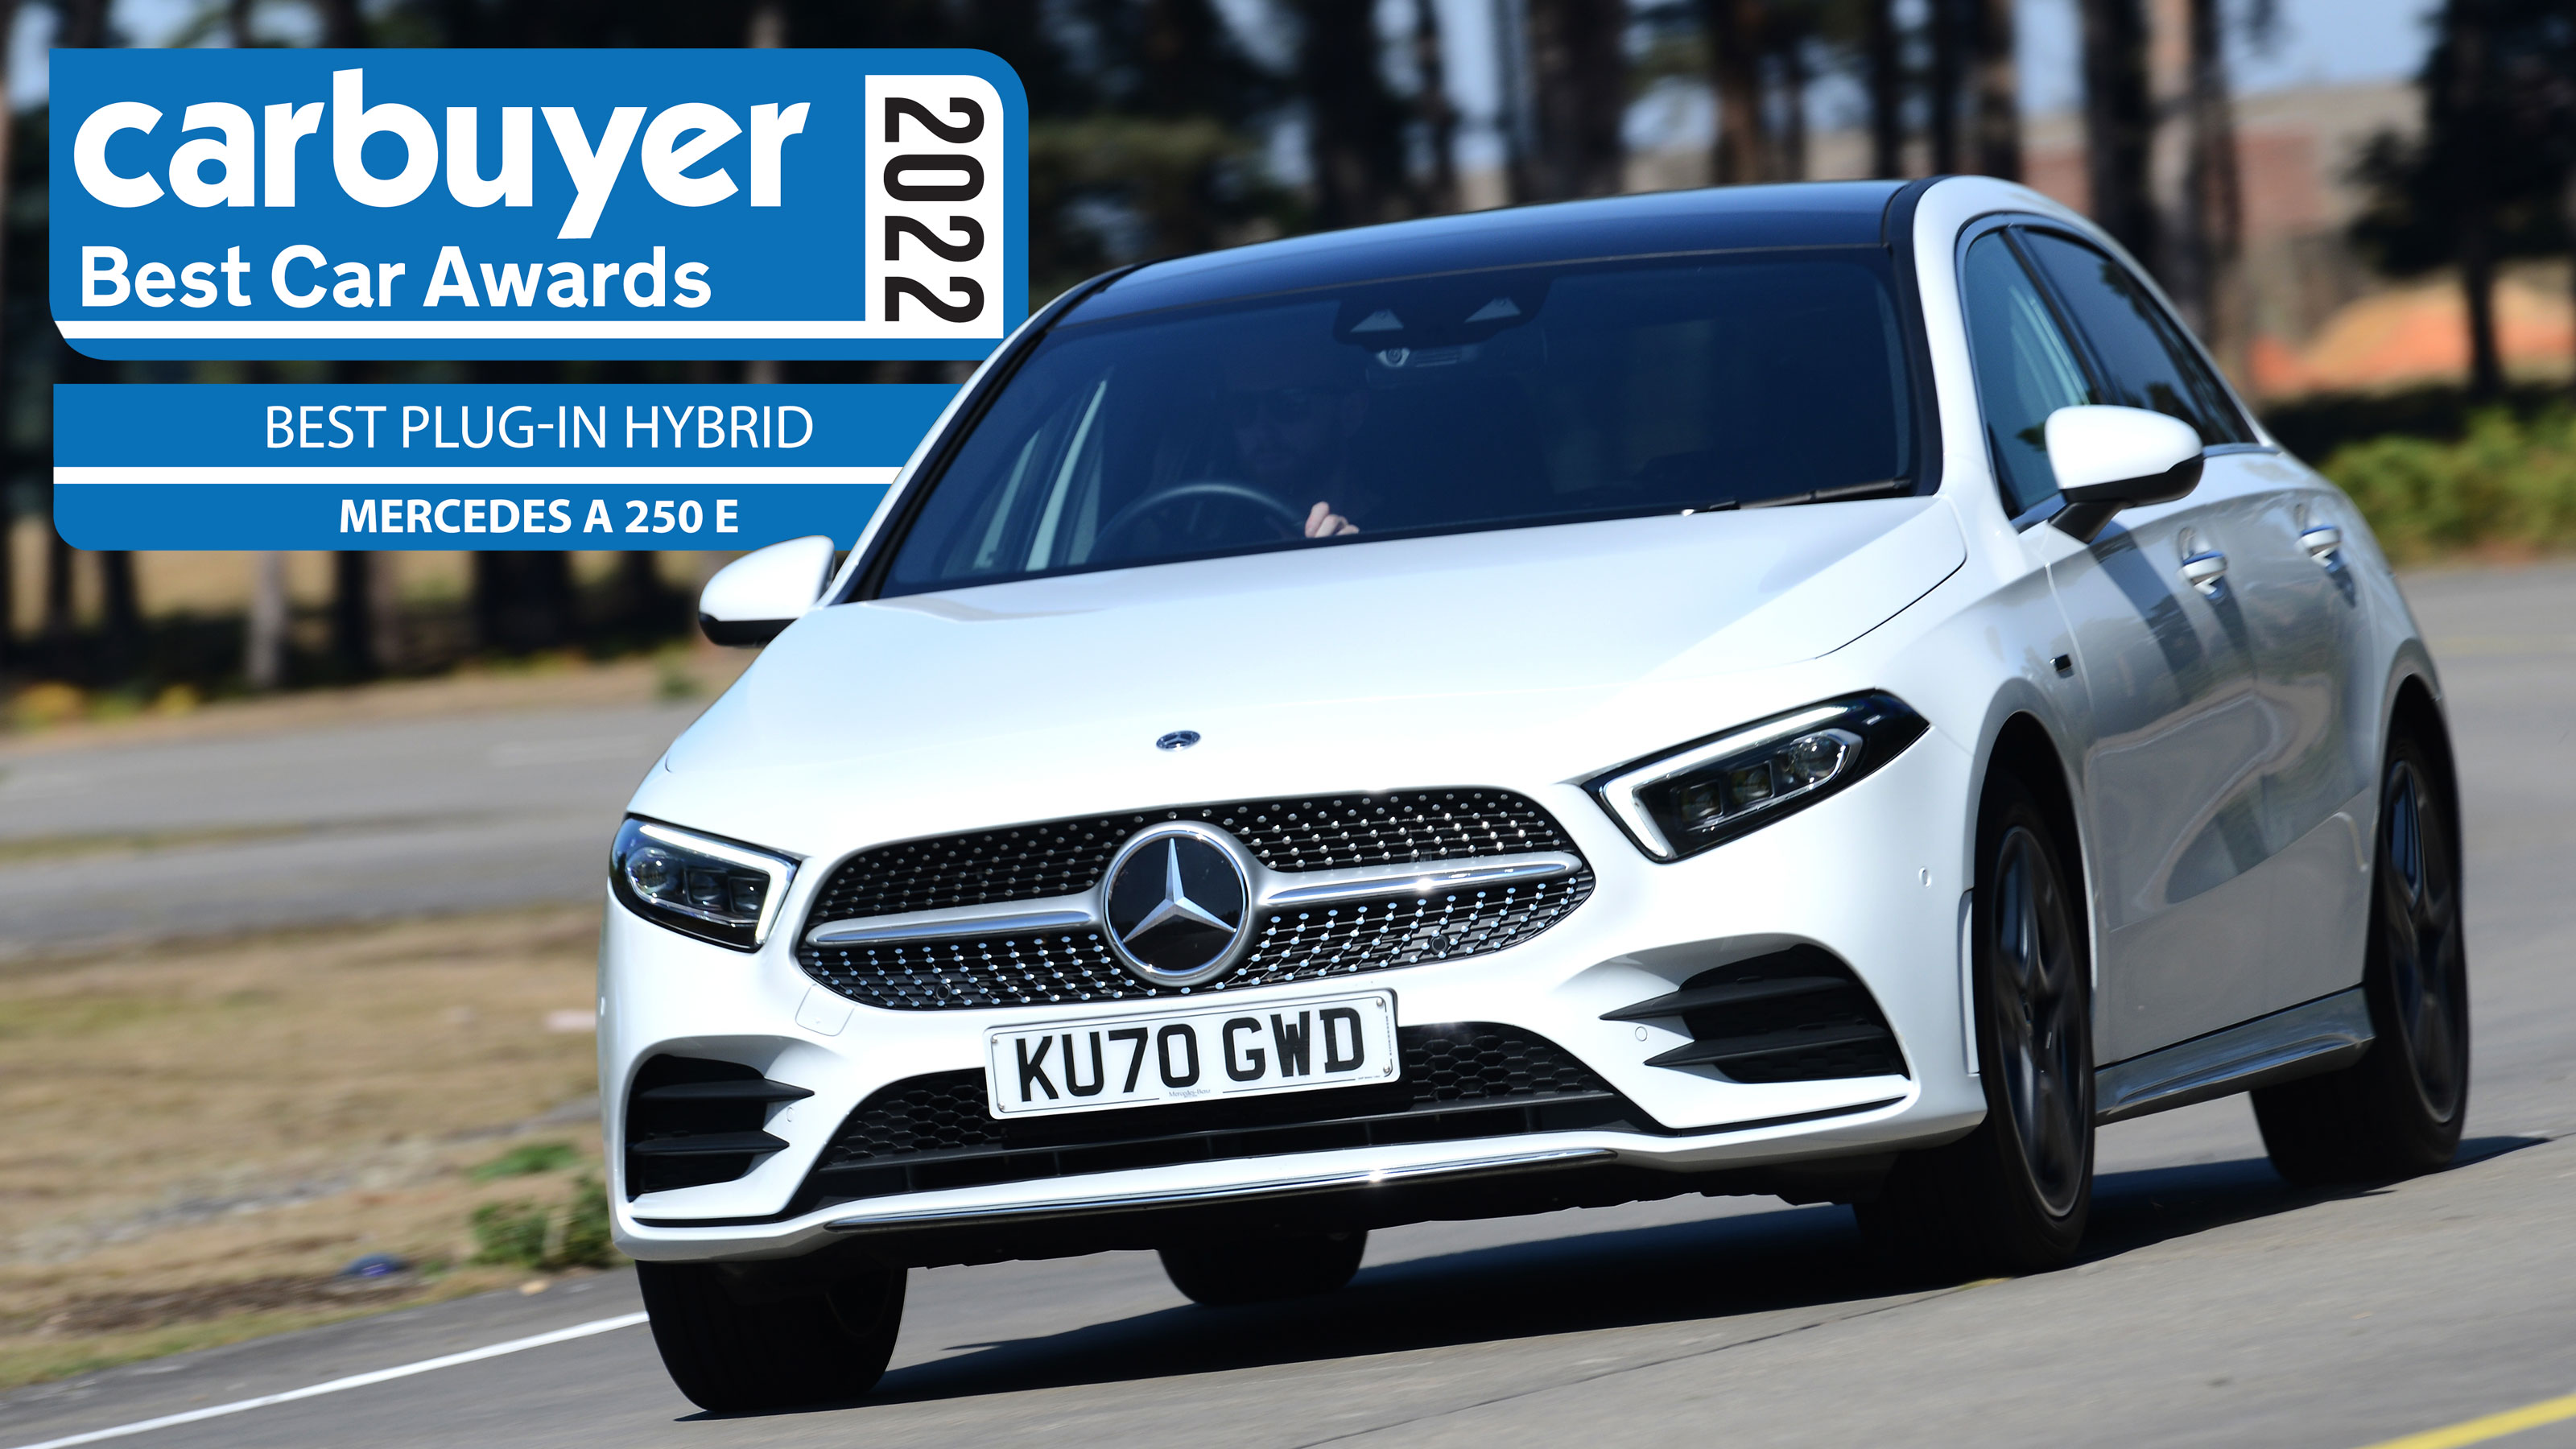 https://mediacloud.carbuyer.co.uk/image/private/s--XaJBd92a--/v1633527456/carbuyer/2021/10/Best%20Plug-in%20Hybrid:%20Mercedes%20A%20250%20e.jpg